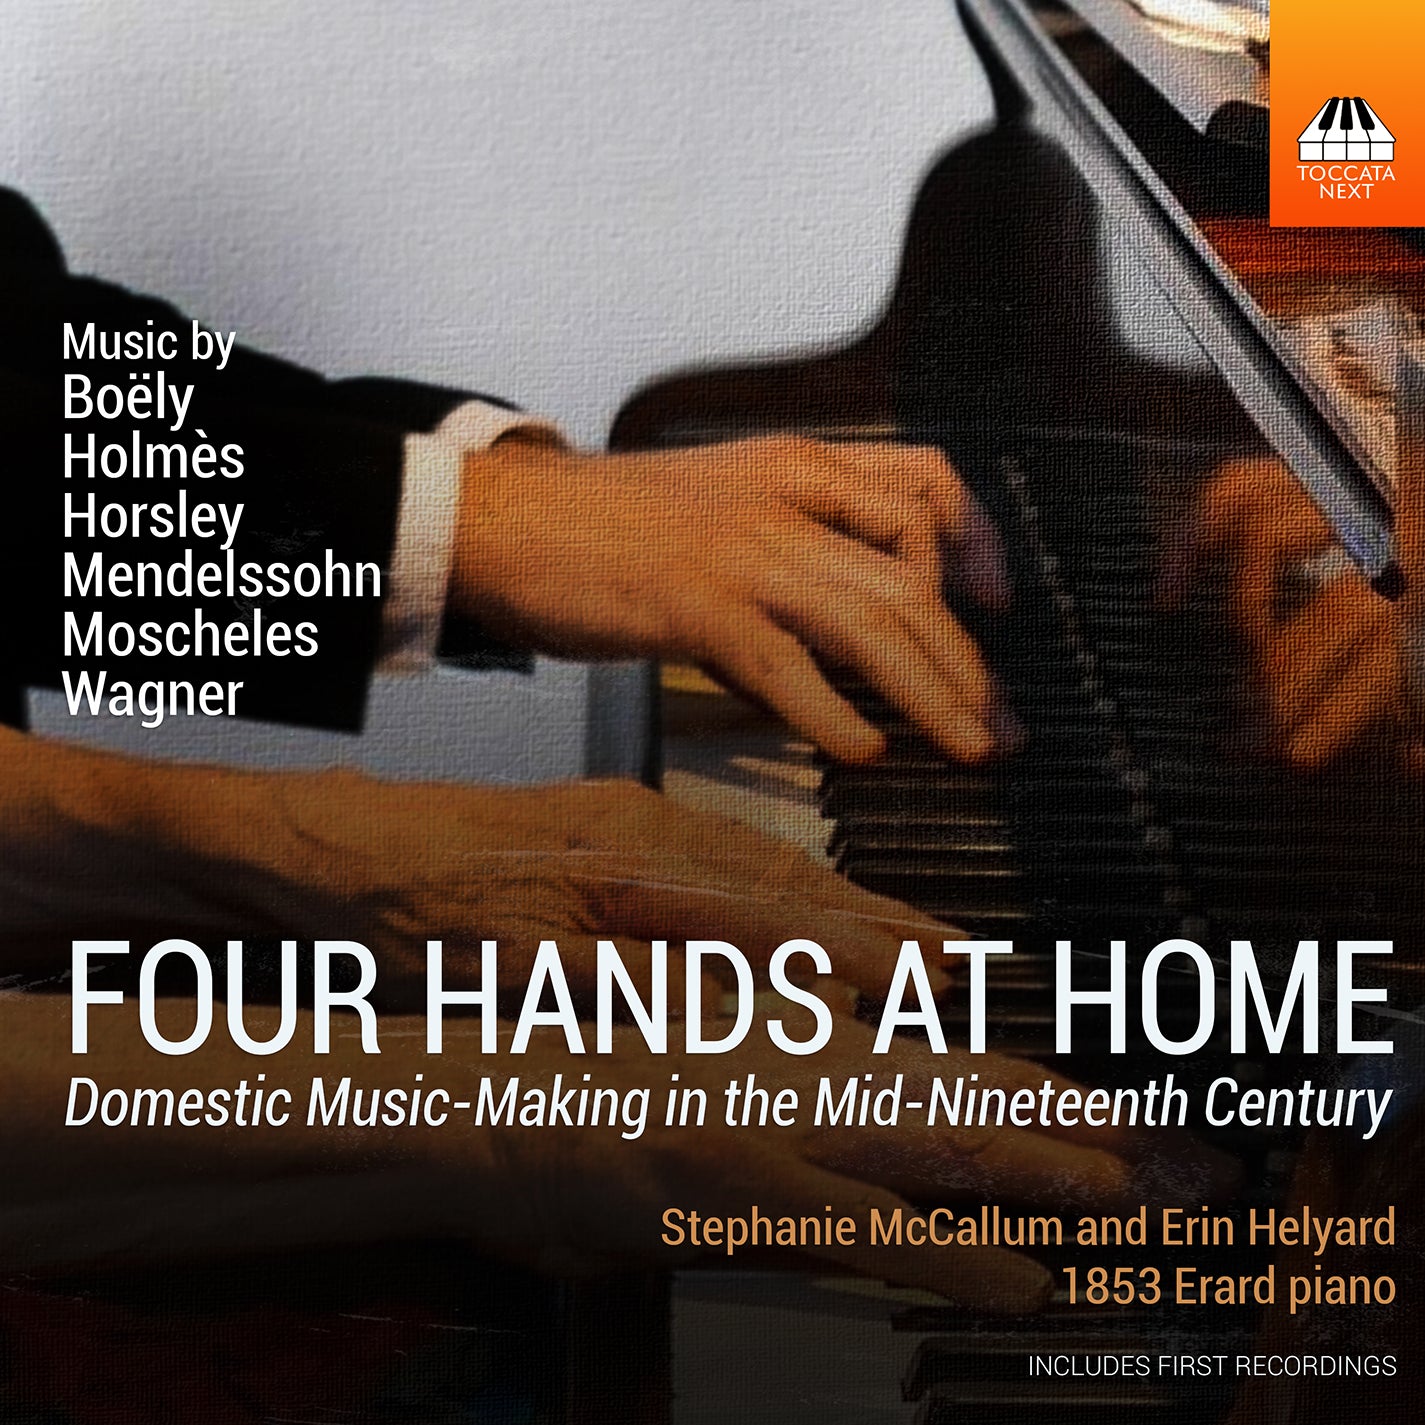 4 Hands at Home - Domestic Music-Making in the Mid-19th Century / McCallum, Helyard